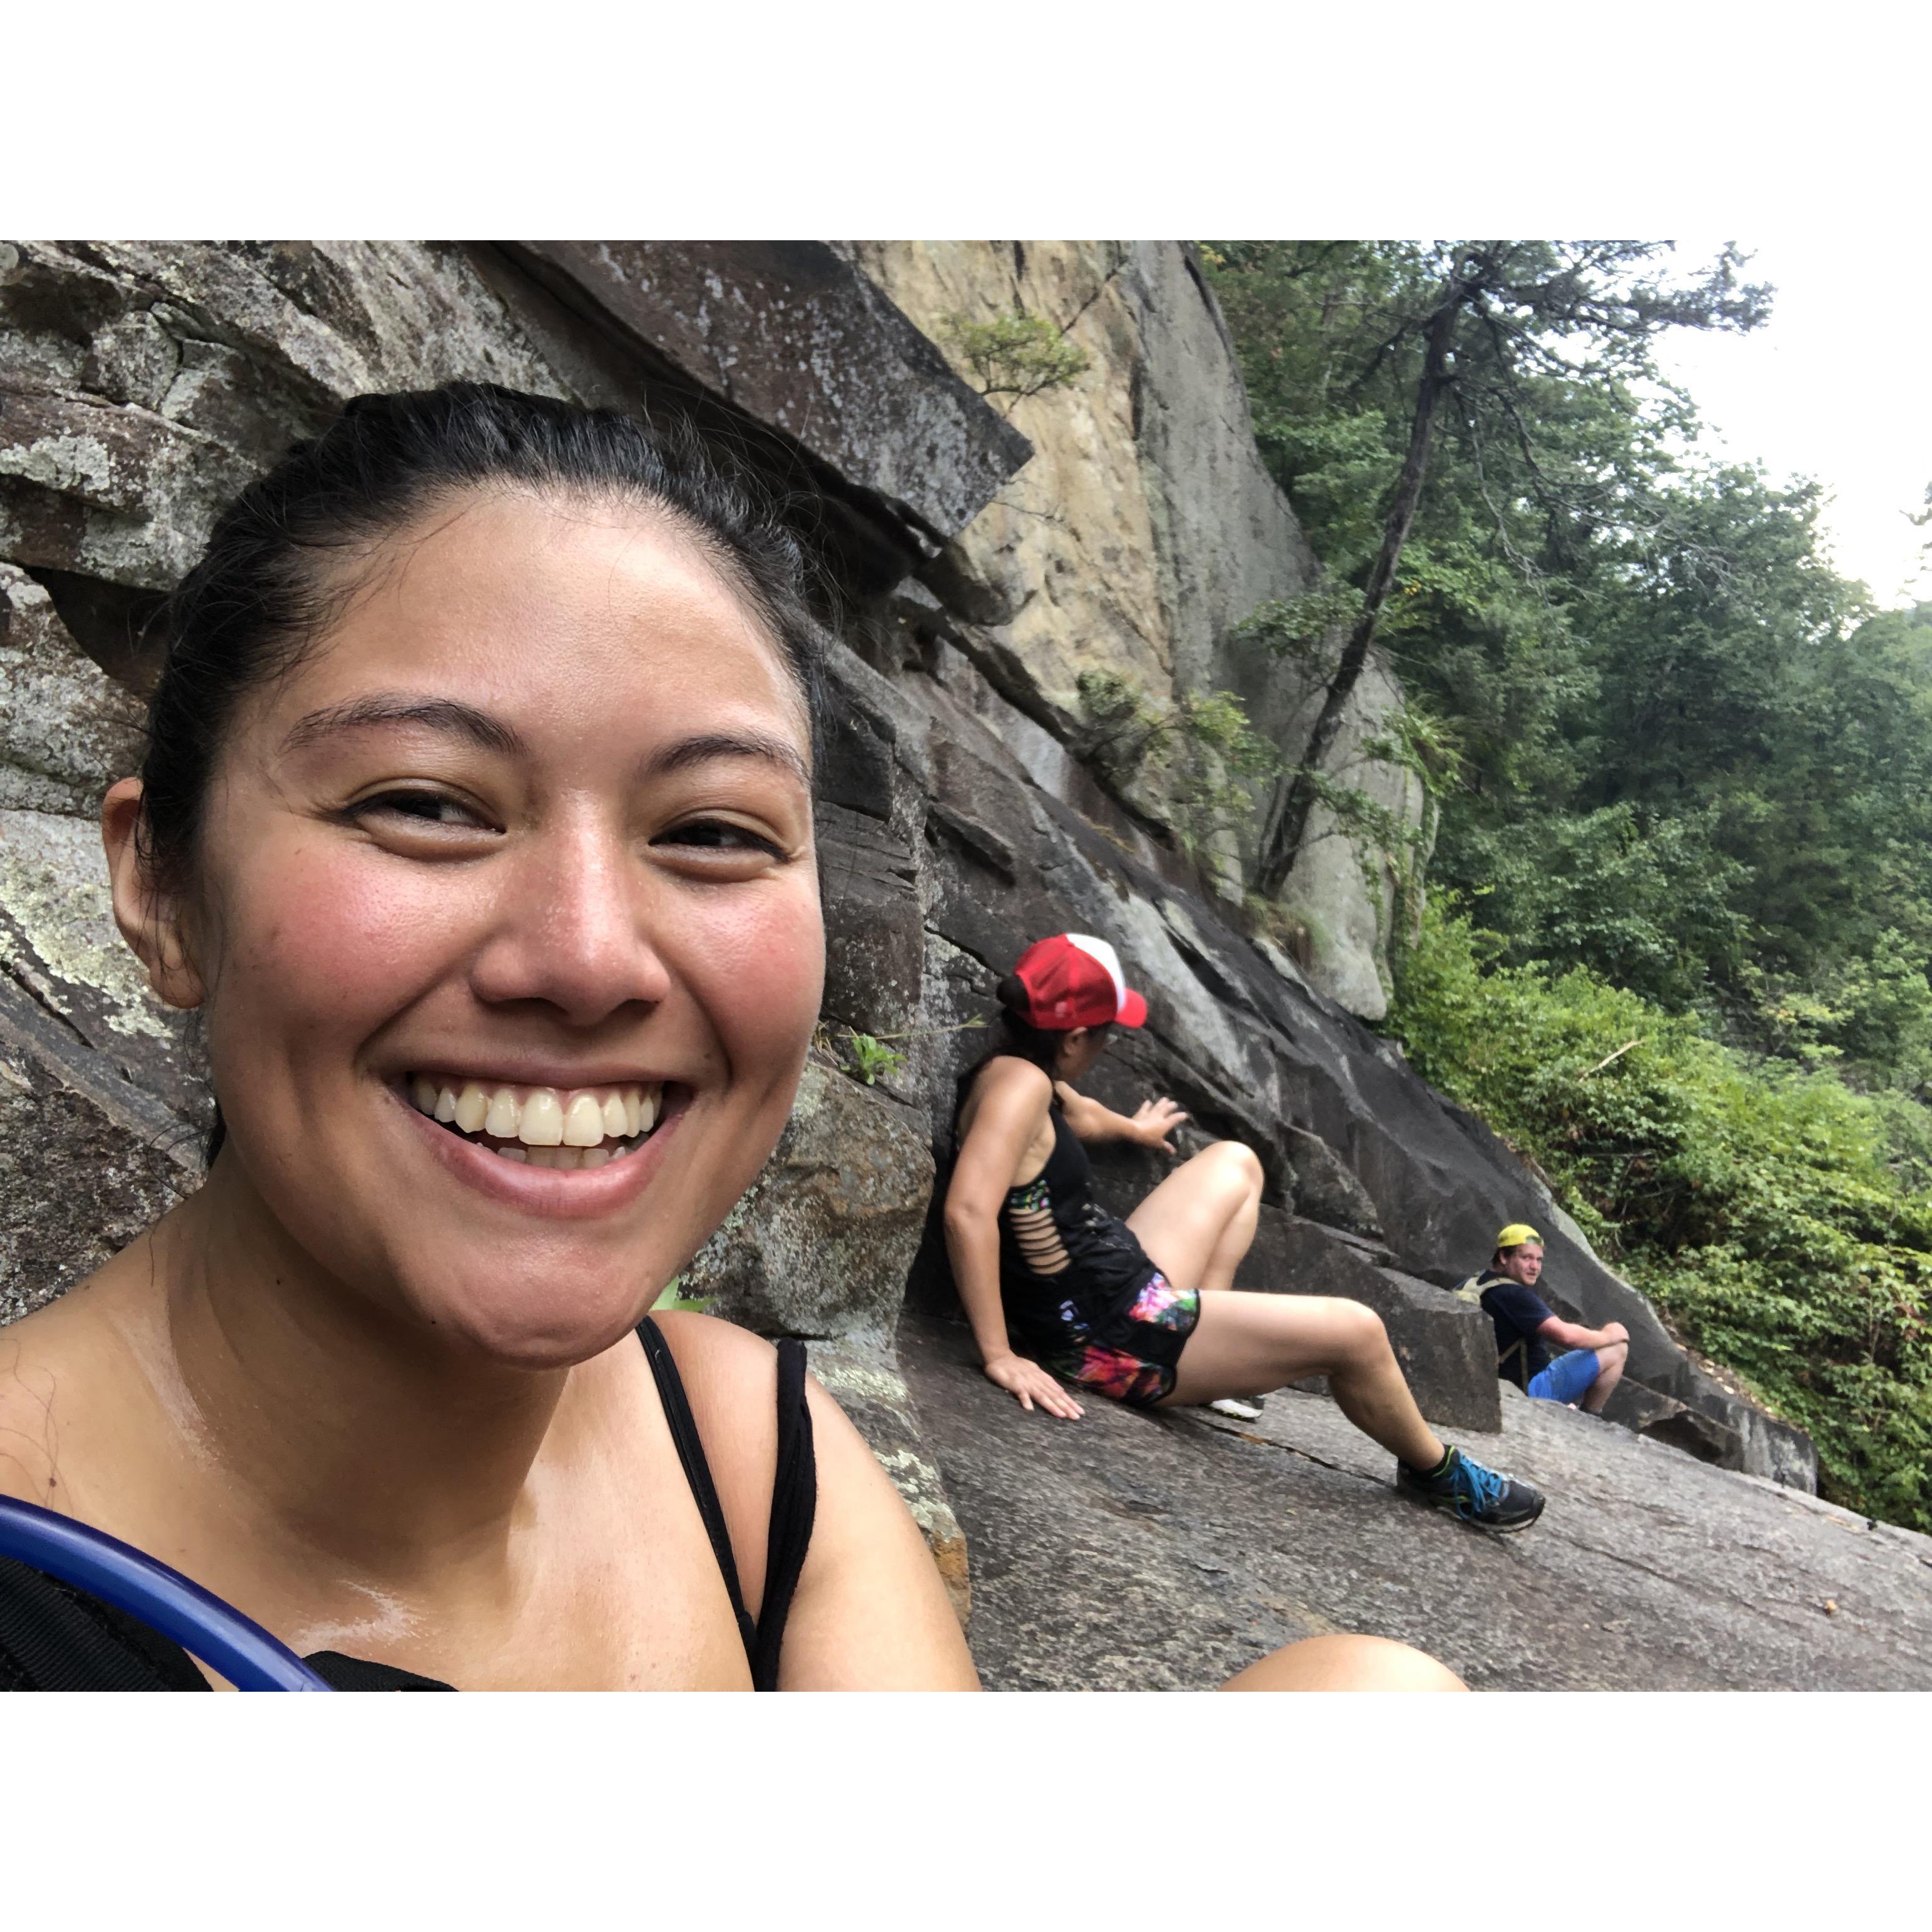 Talulah falls hike - mom was pissed and terrified (August 2021)